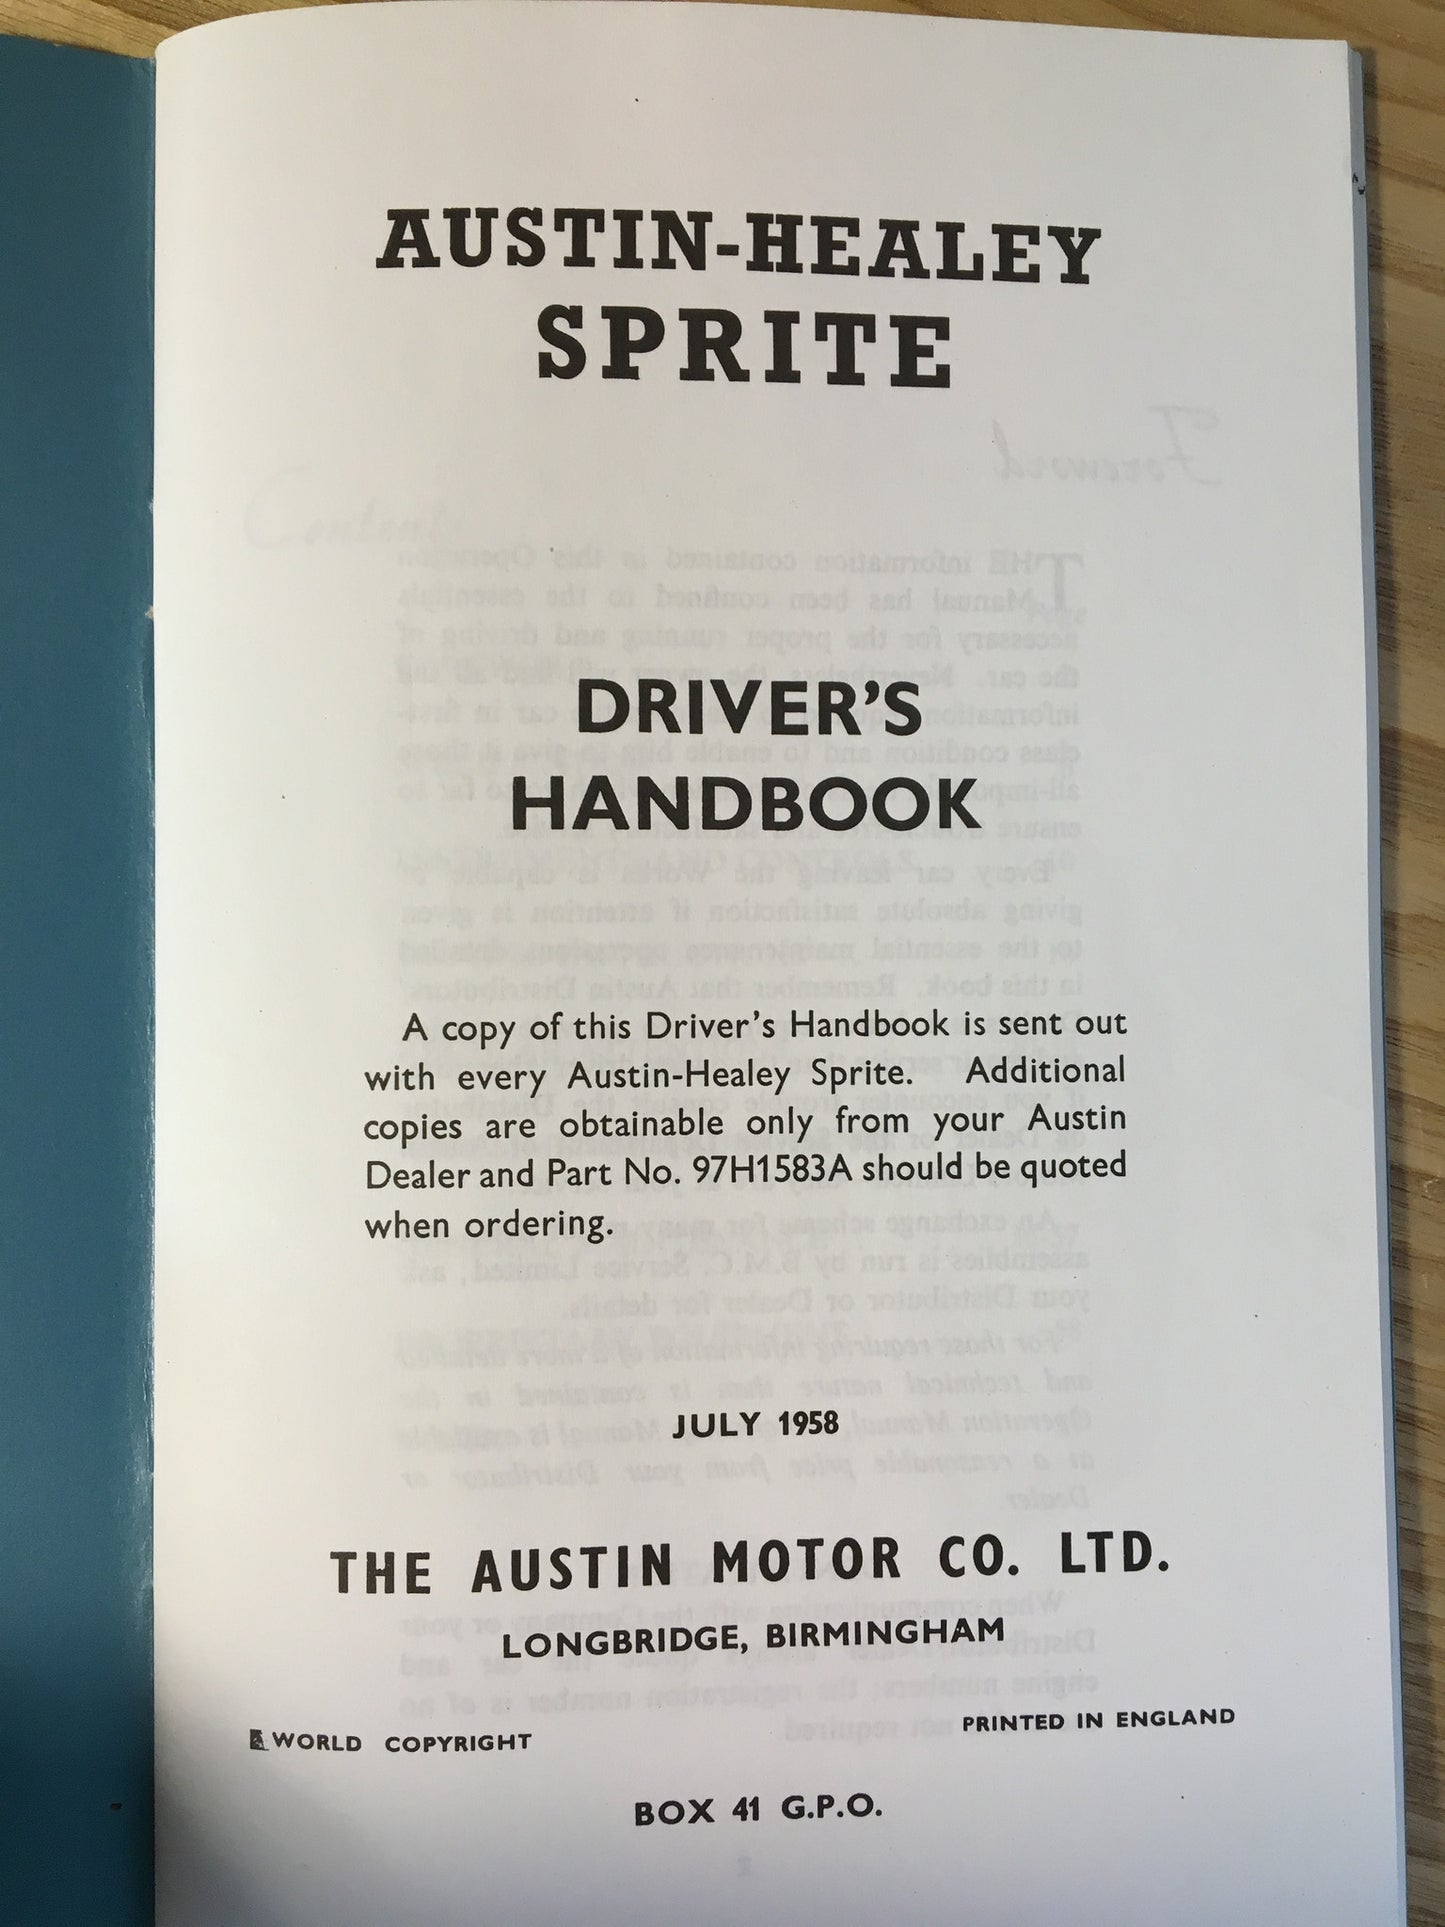 Austin Healey Sprite Reproduction of Original Owners Manual Books - Bugeye